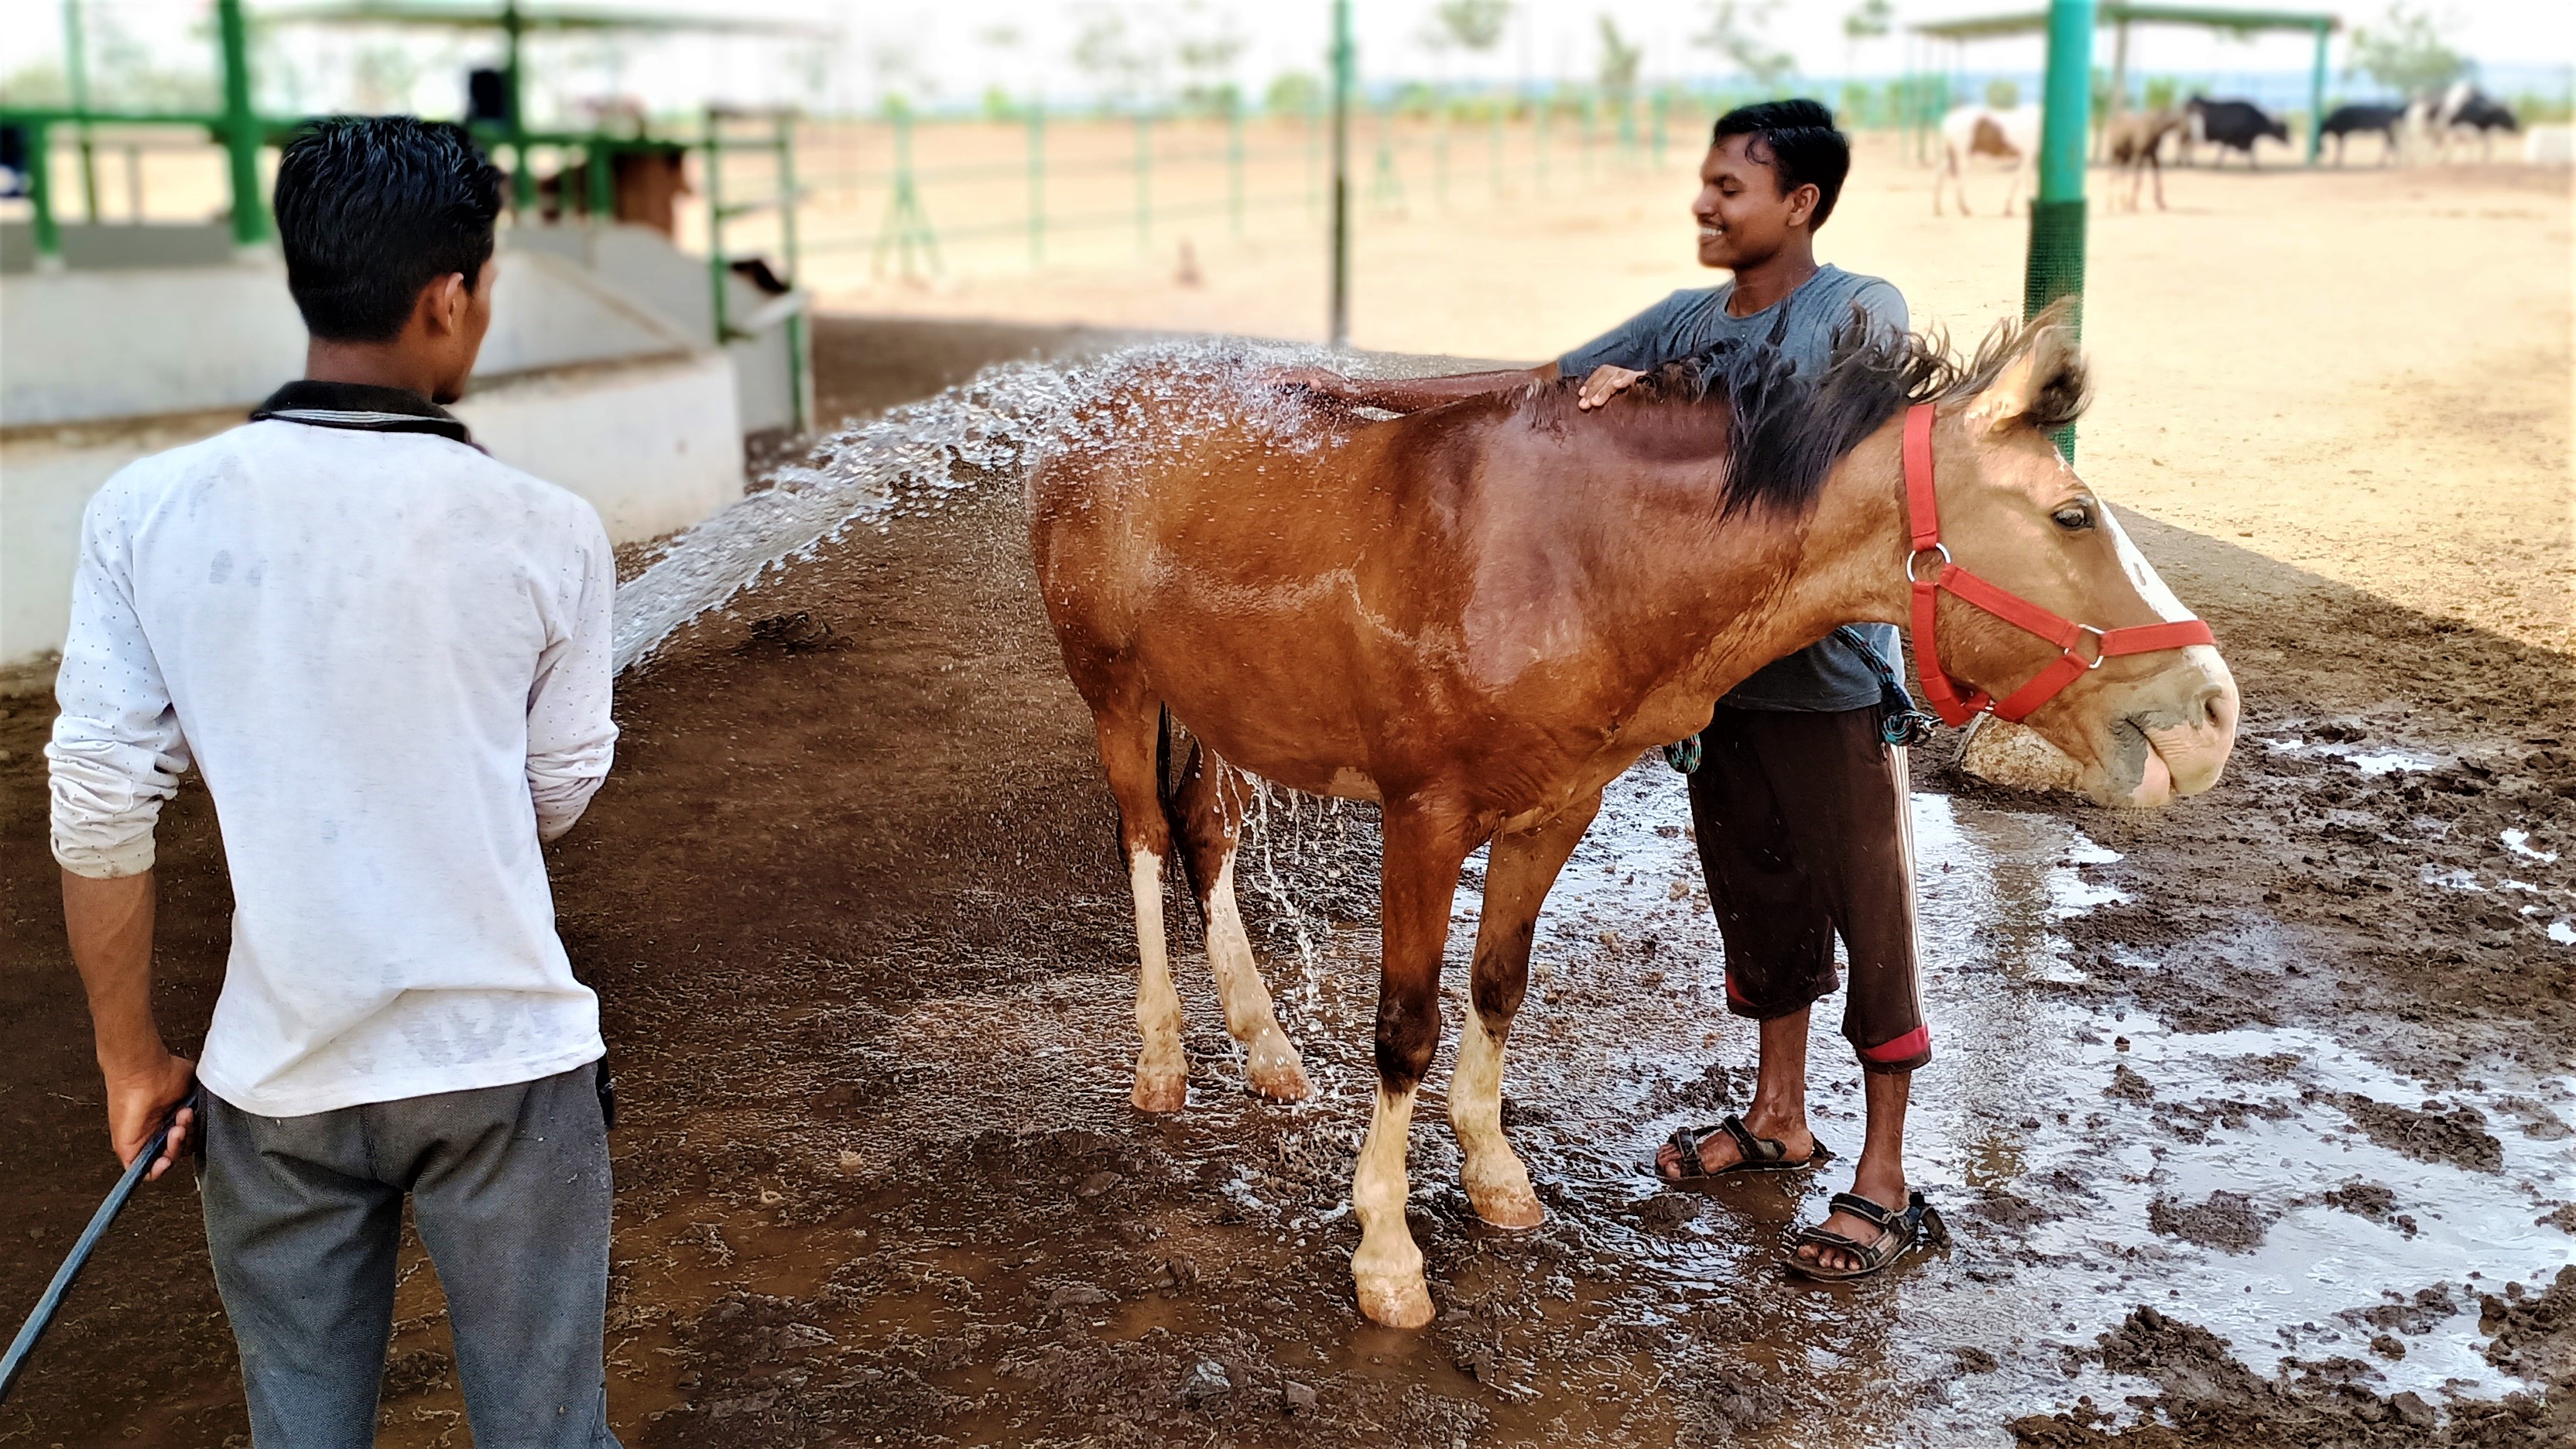 Two sanctuary workers use a hose to bathe a horse.